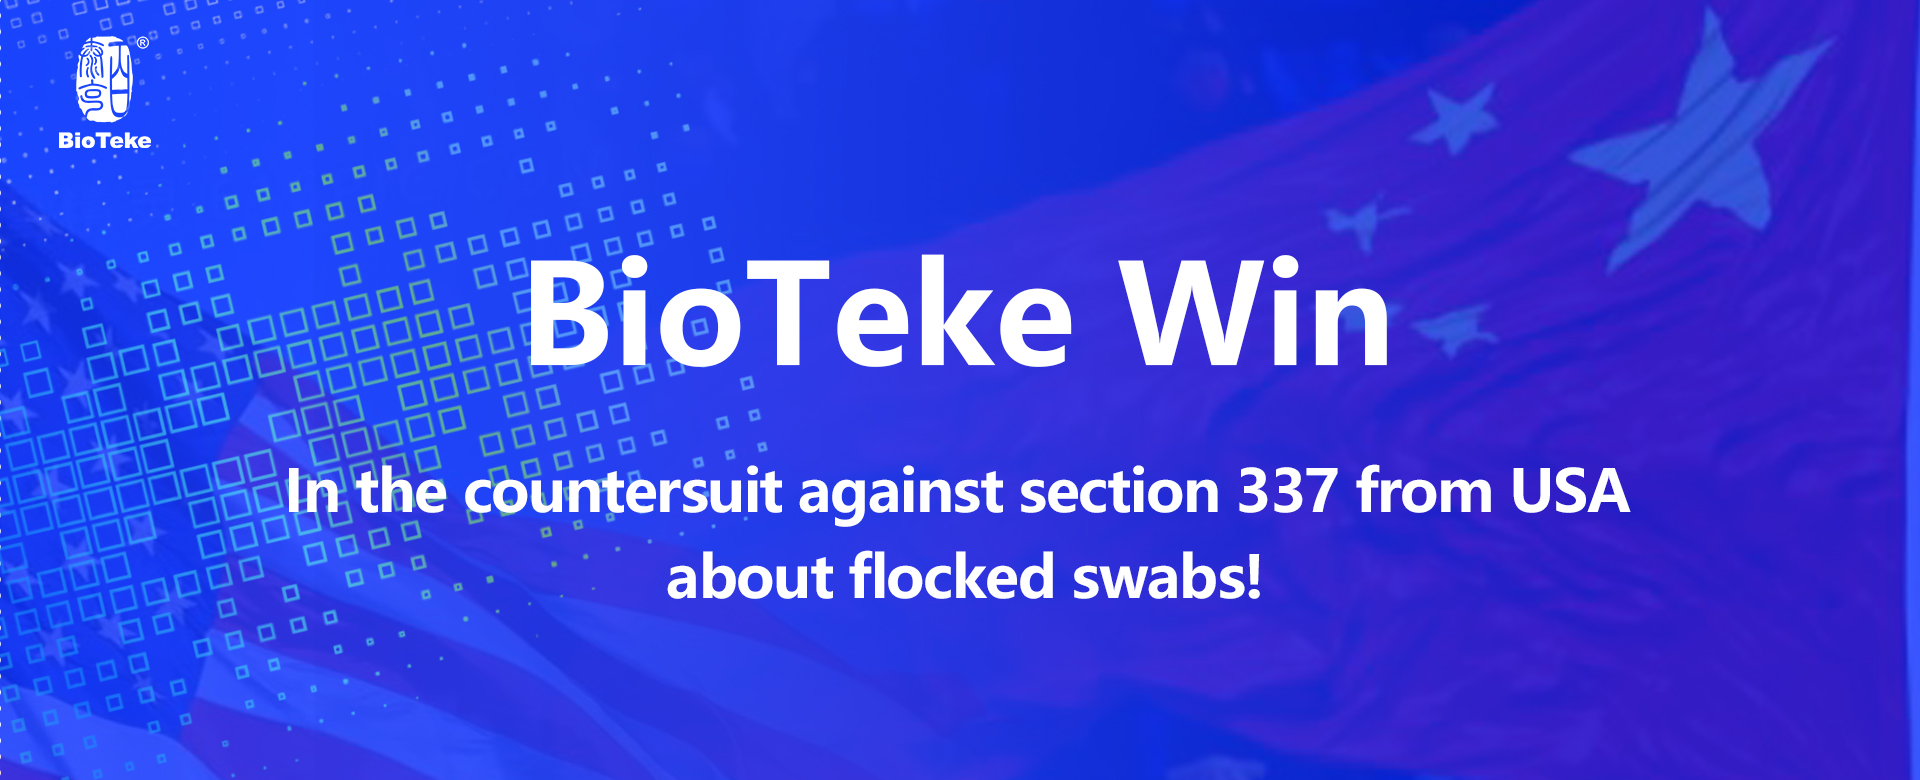 BioTeke wins in the countersuit against section 337 from USA !